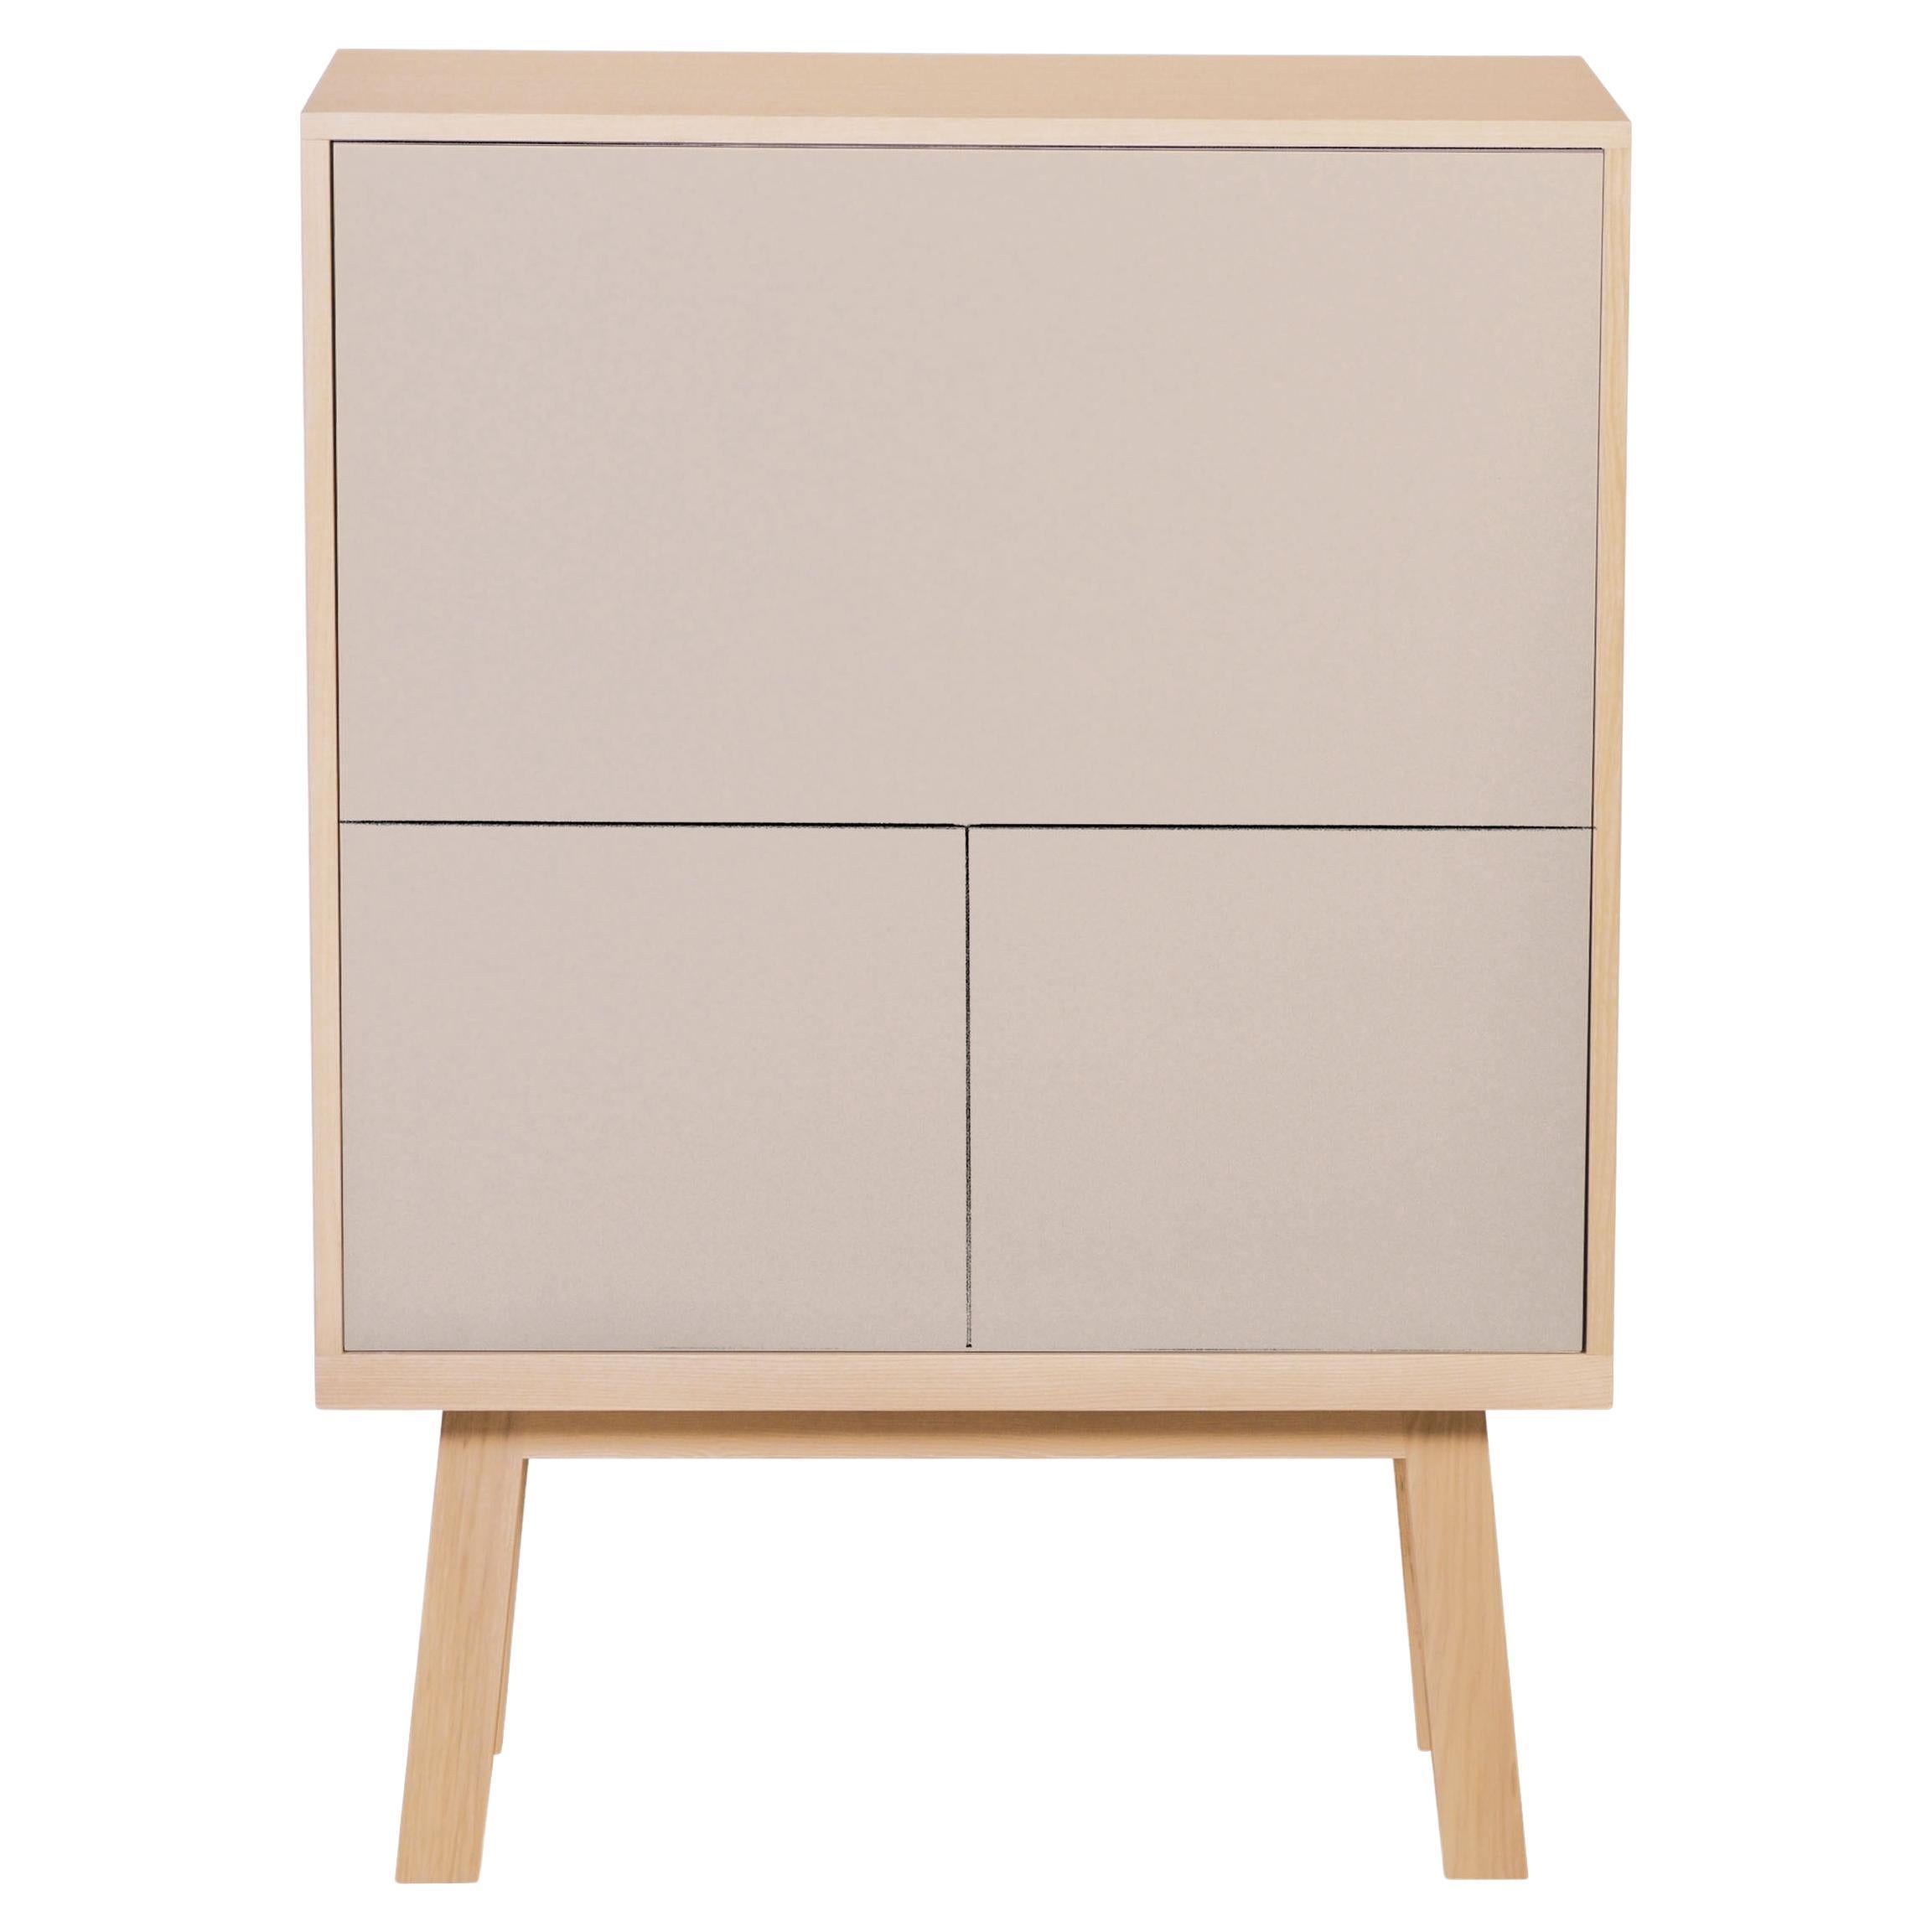 Light Grey design secretaire desk in Ash, 11 colours and 2 widths are available For Sale